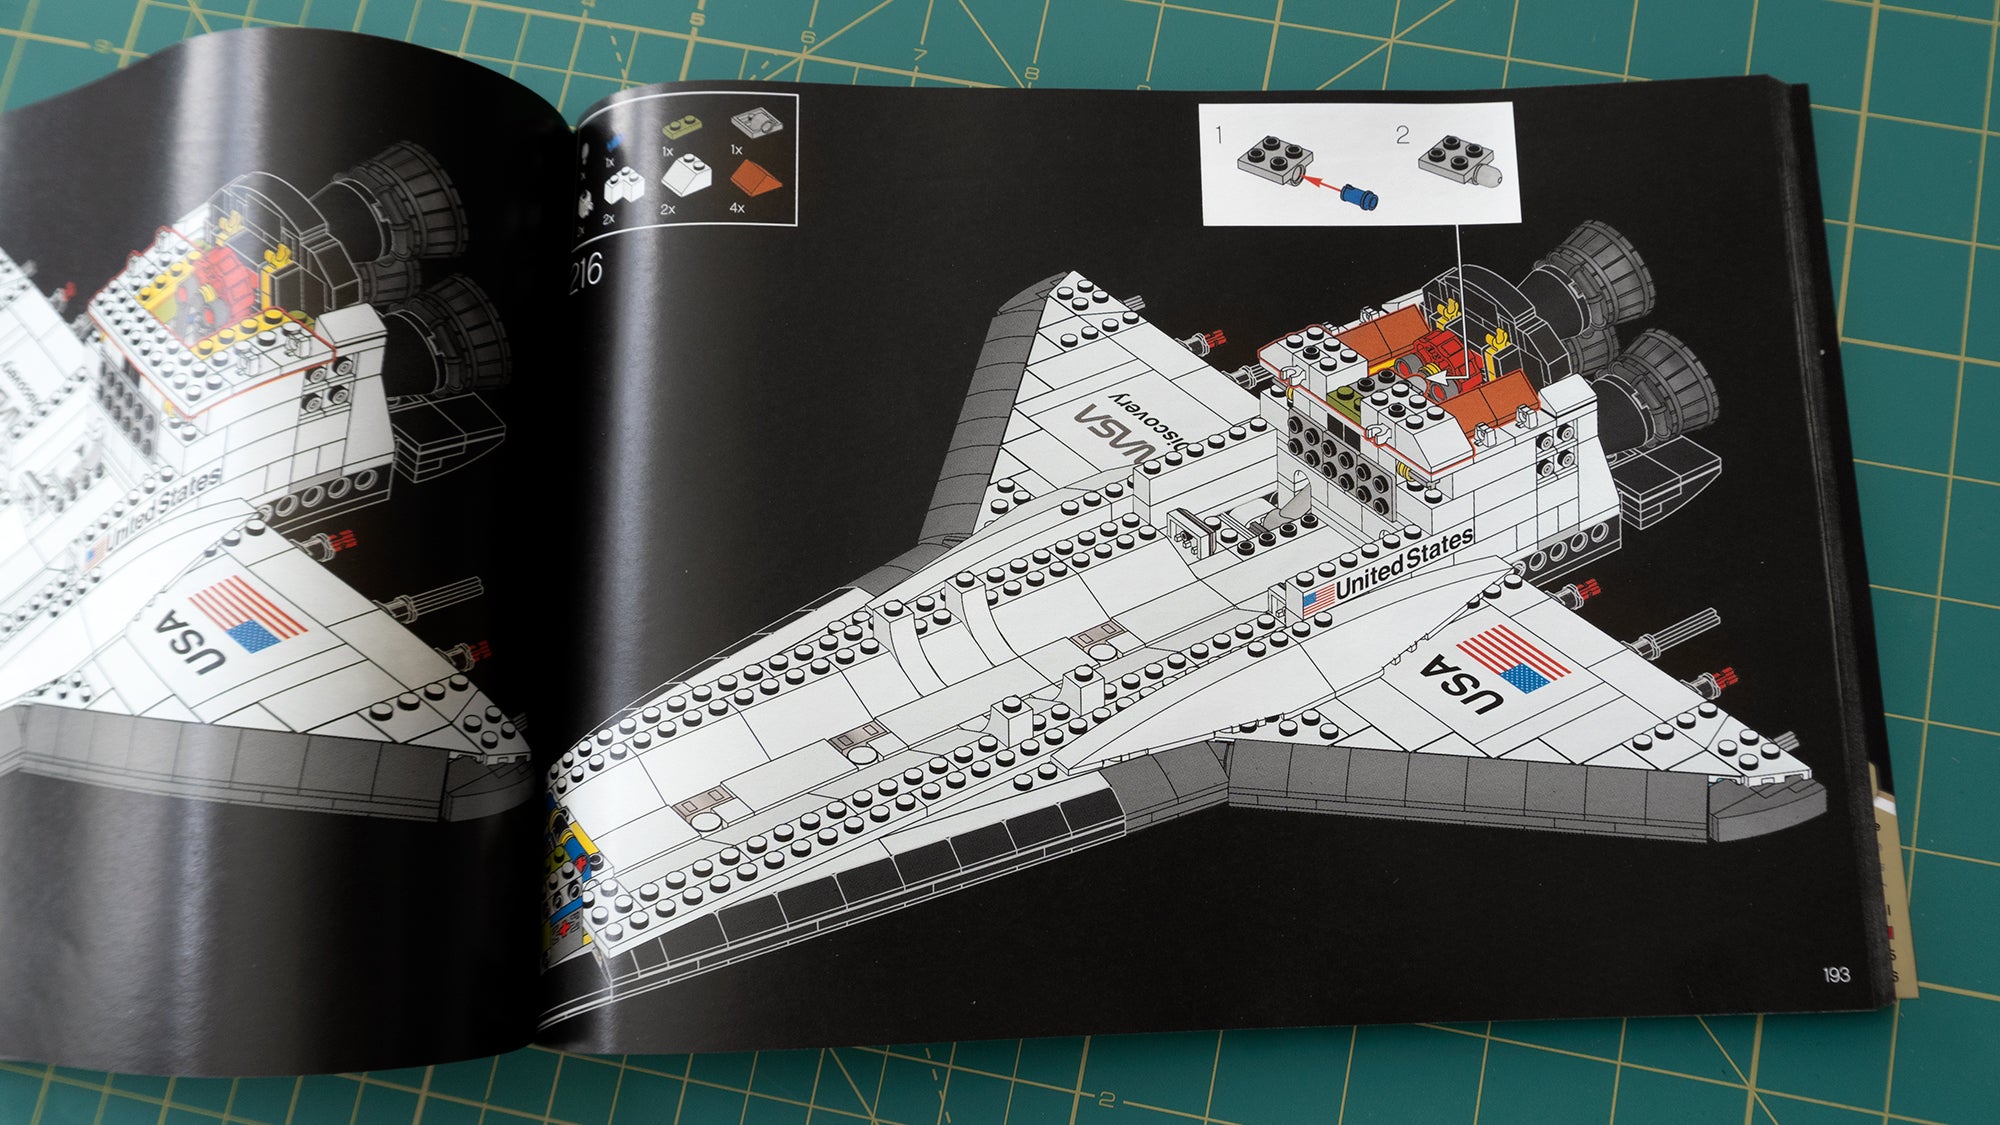 Lego has already announced that it's moving away from instruction manuals featuring black backgrounds, but not soon enough for the Discovery model to avoid them. (Photo: Andrew Liszewski/Gizmodo)